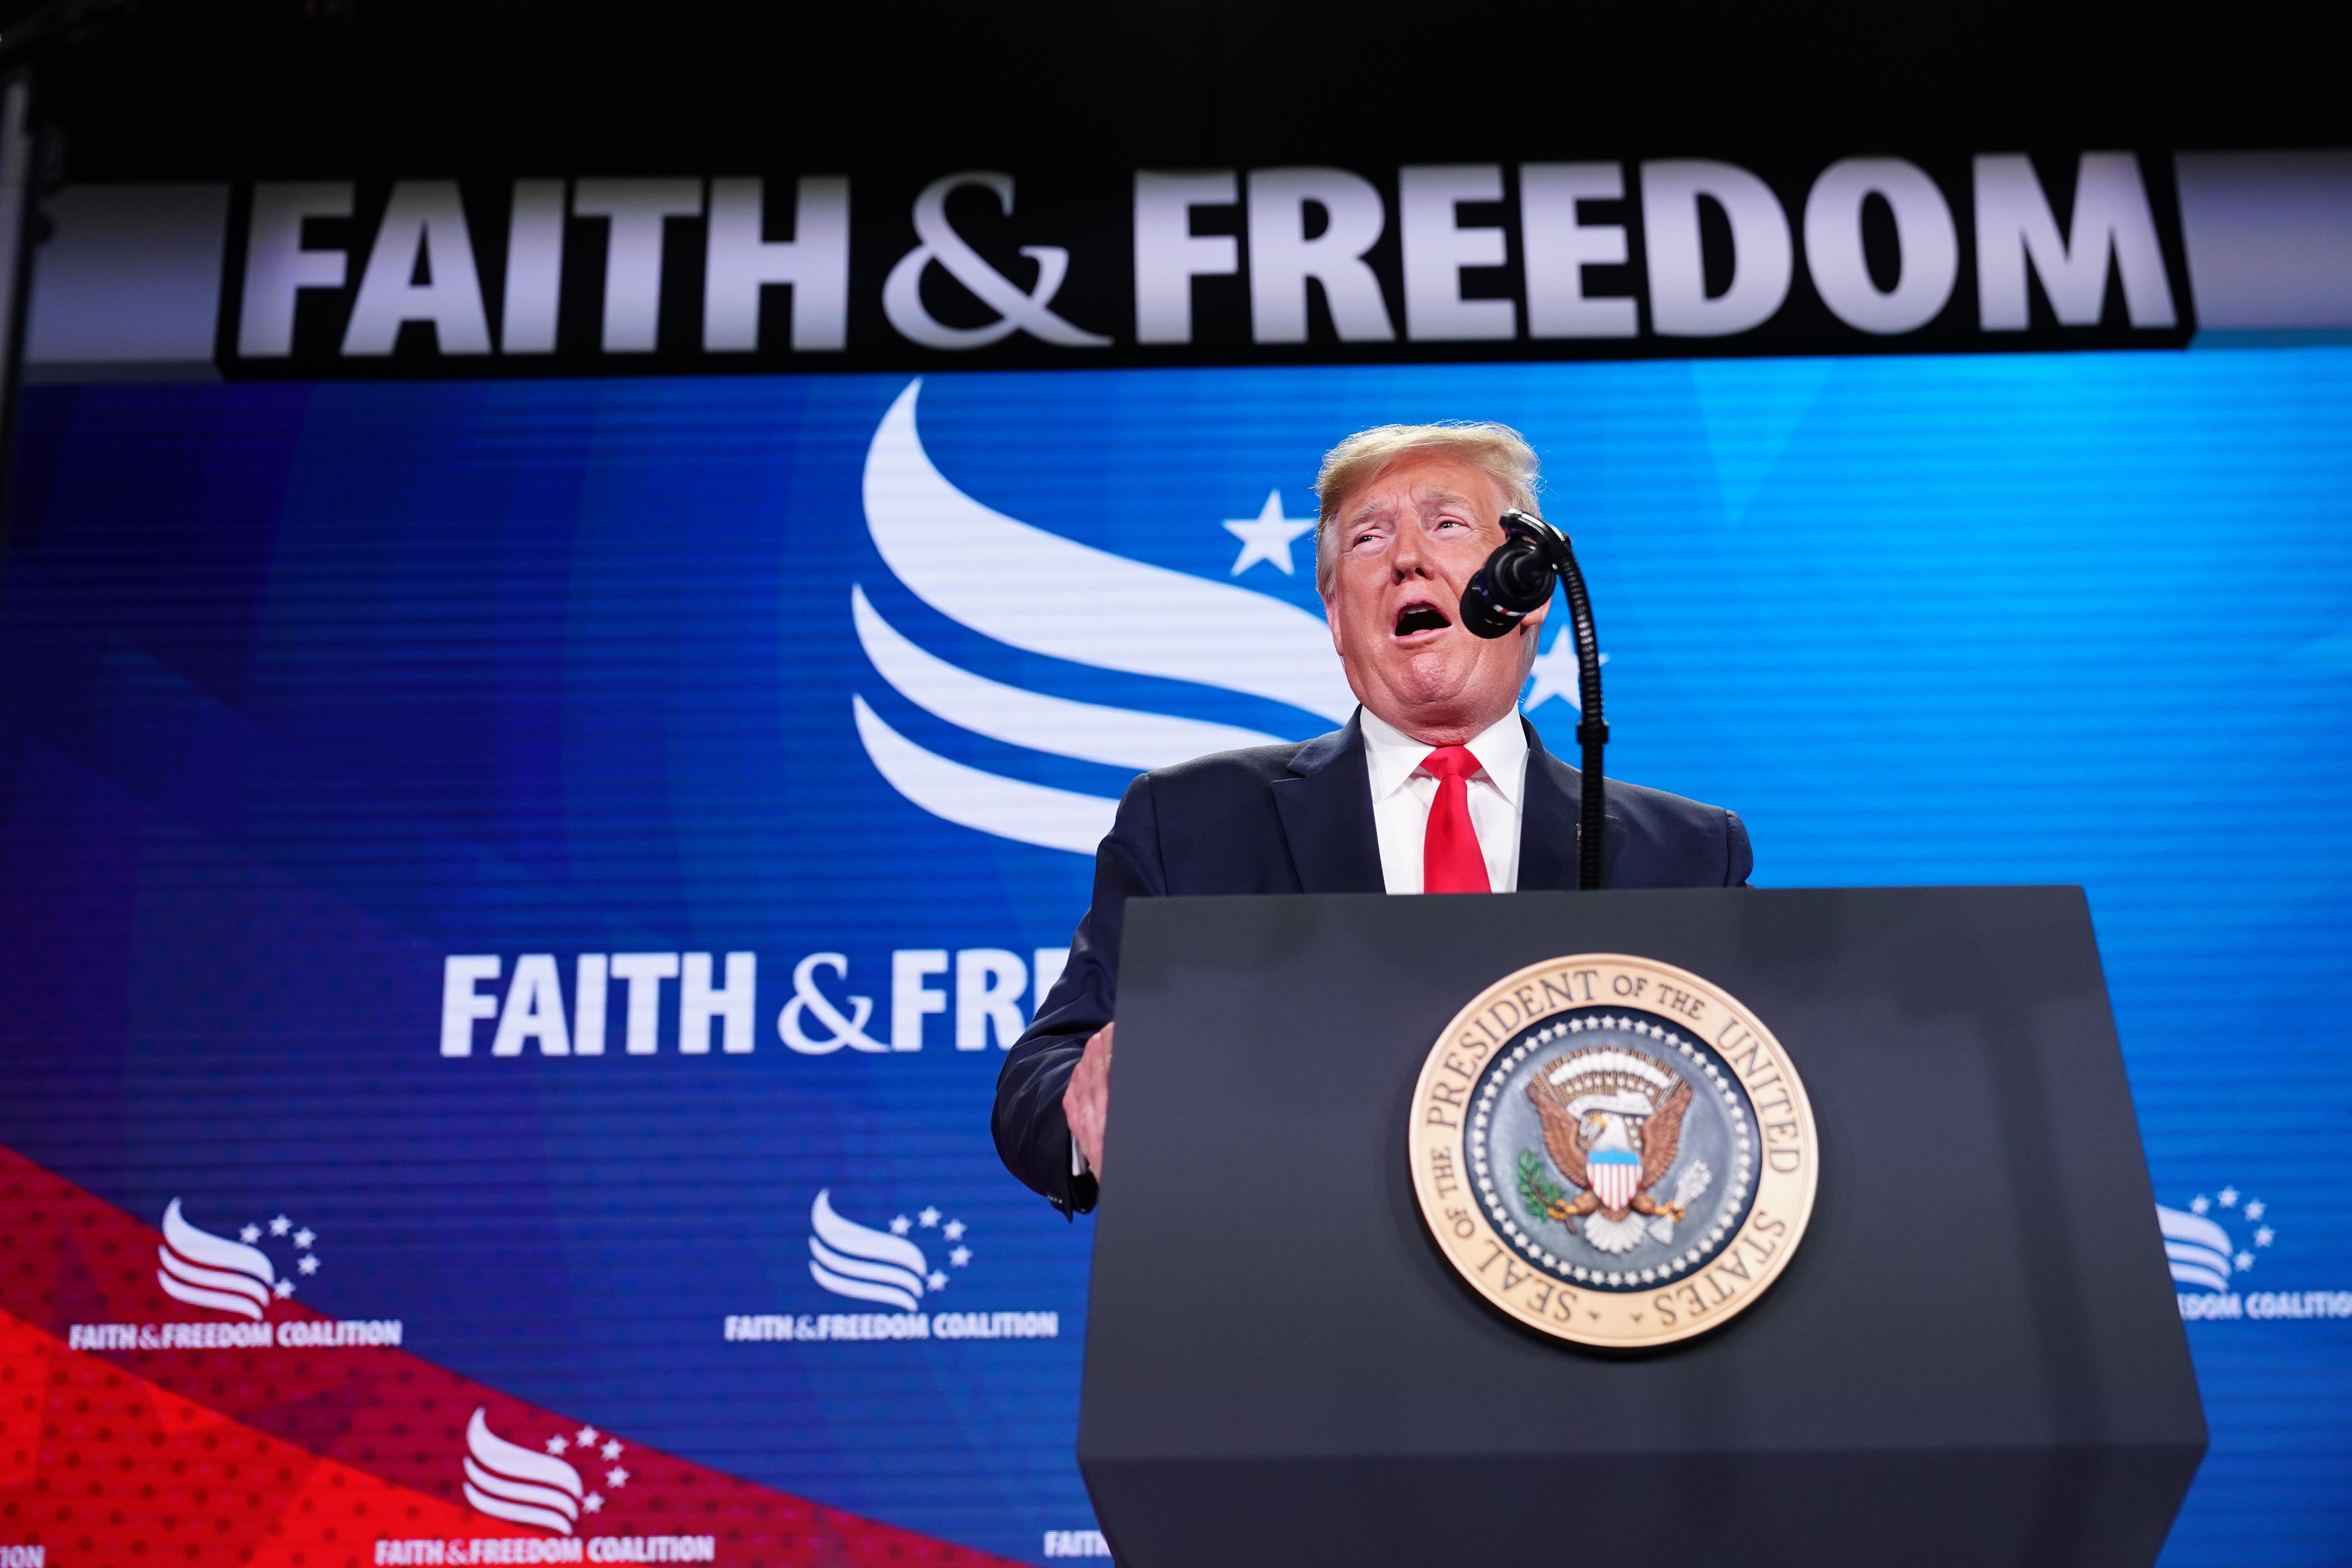 US President Donald Trump speaks at the Faith and Freedom Coalition's Road to Majority Policy Conference at the Washington Marriott Wardman Park Hotel in Washington, DC on June 26, 2019. (Photo by MANDEL NGAN / AFP) (Photo by MANDEL NGAN/AFP via Getty Images)